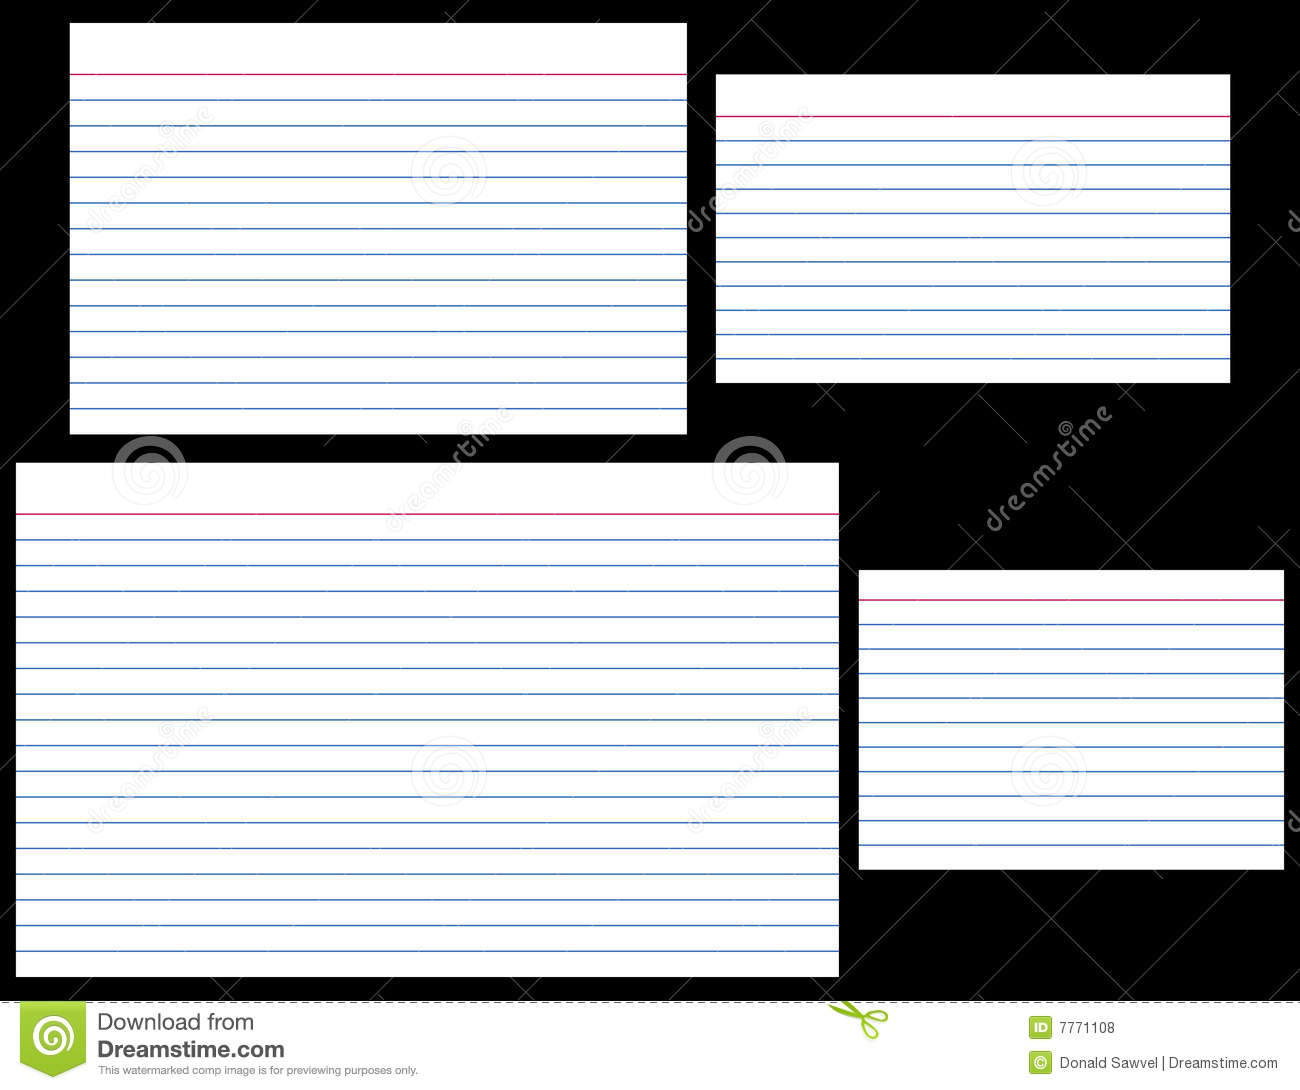 Index Cards stock vector